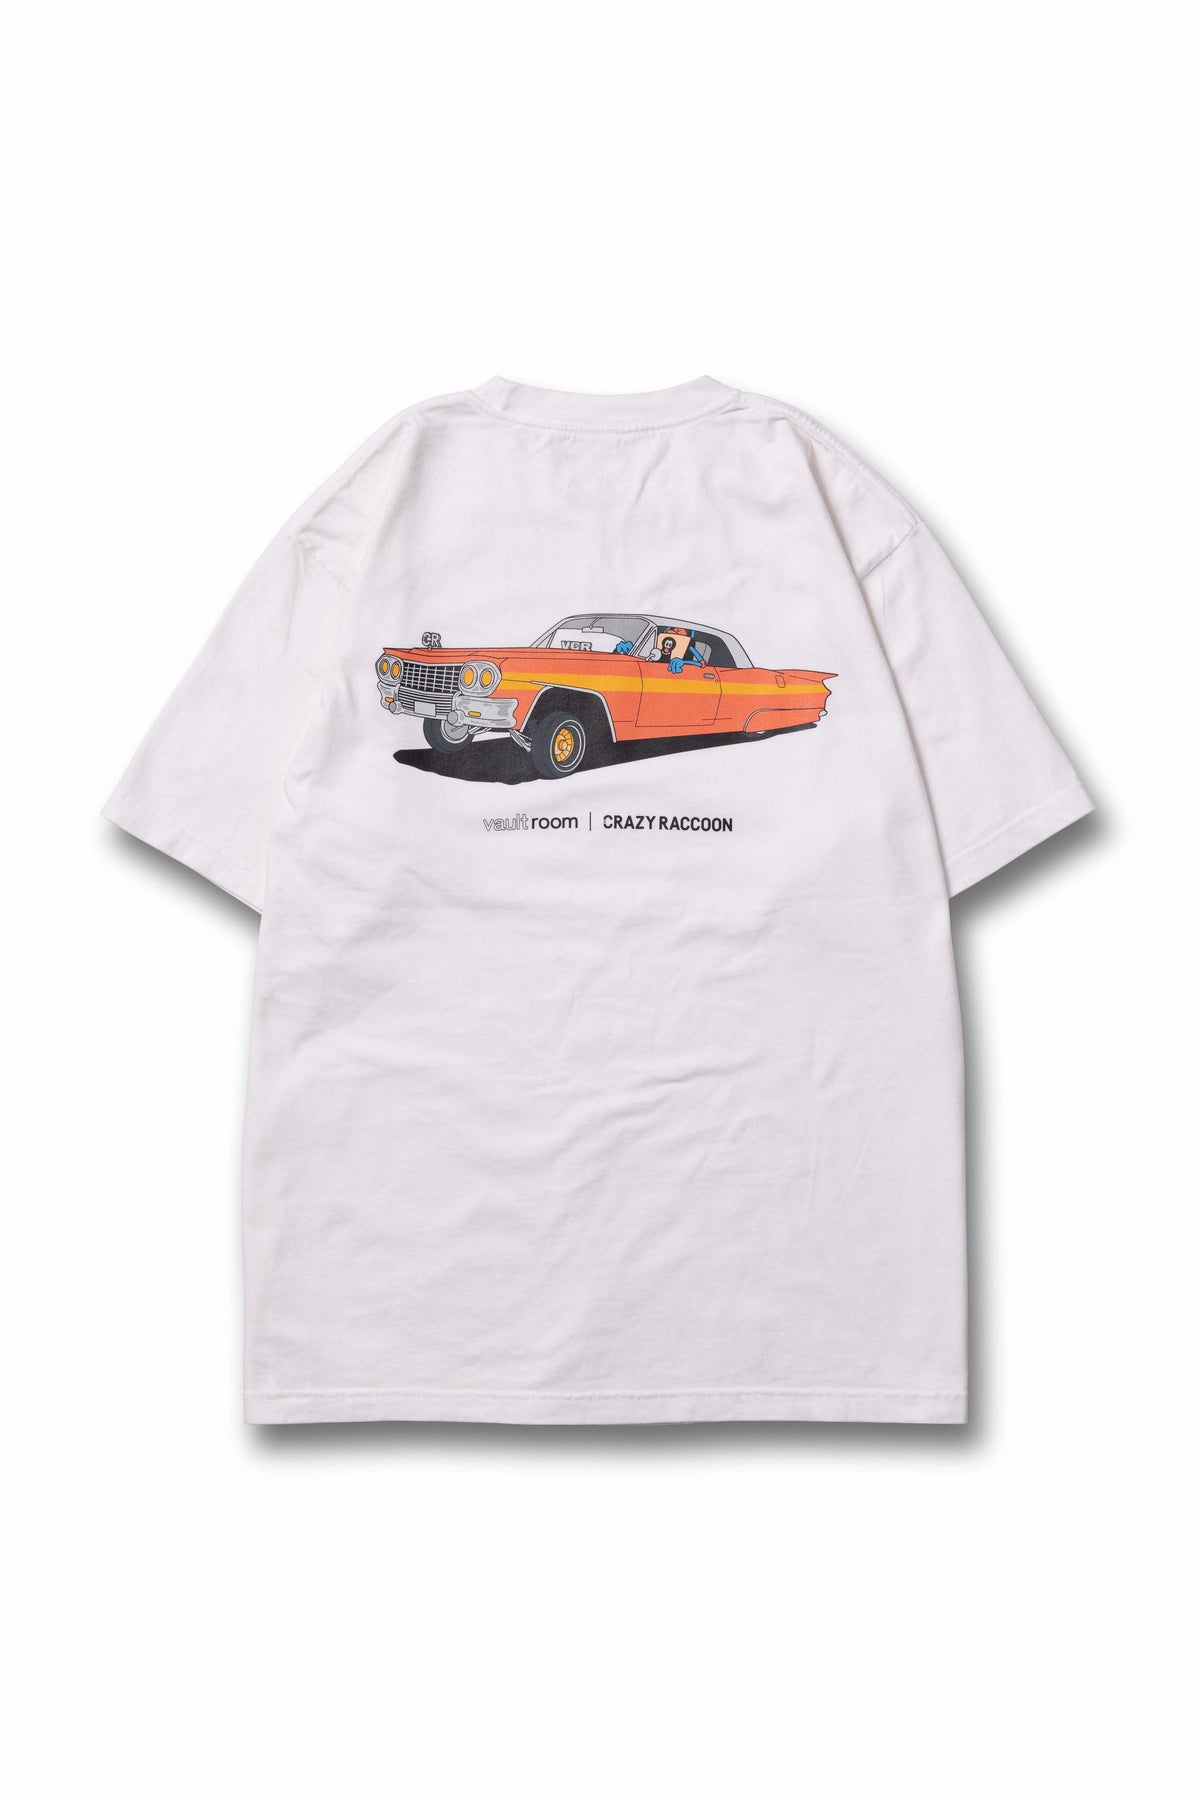 vaultroom VCR LOWRIDER TEE / CHARCOAL